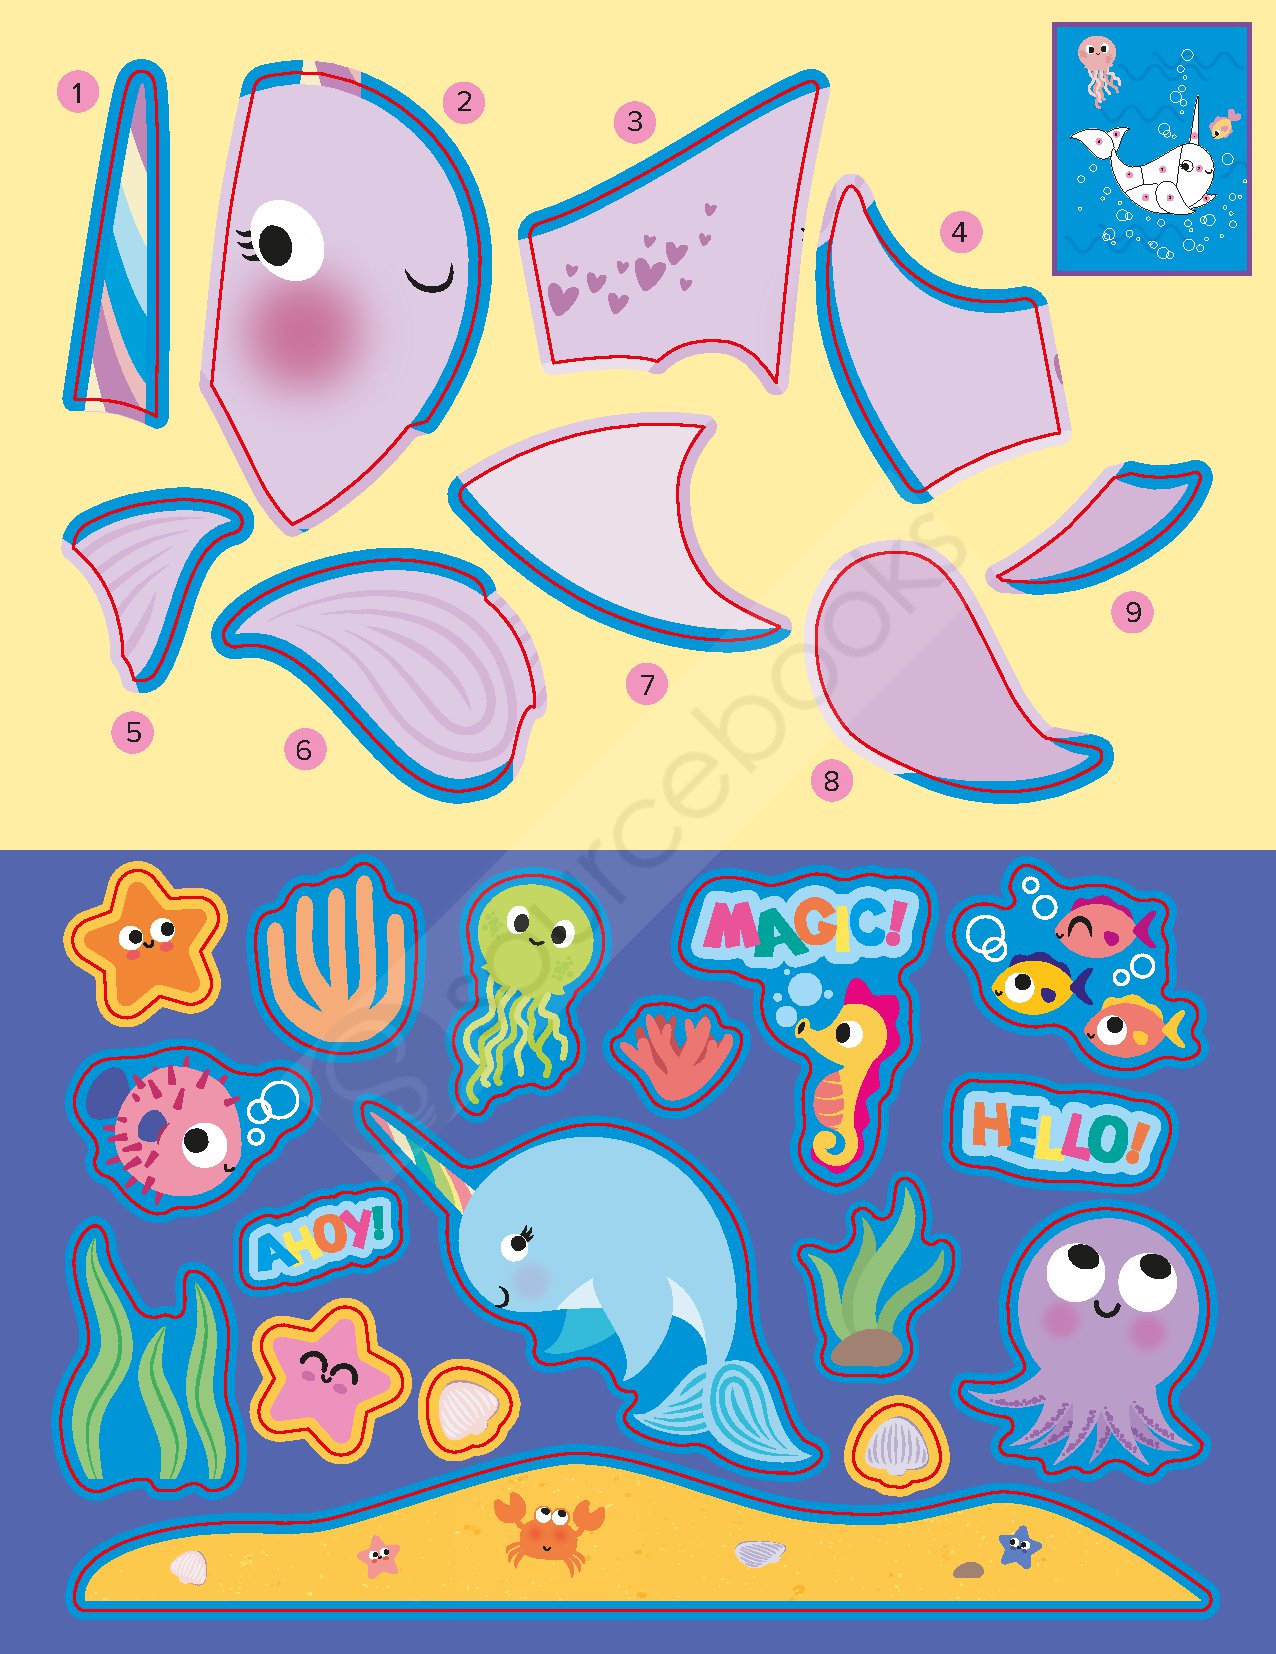 My First Sticker By Numbers: Magical Creatures